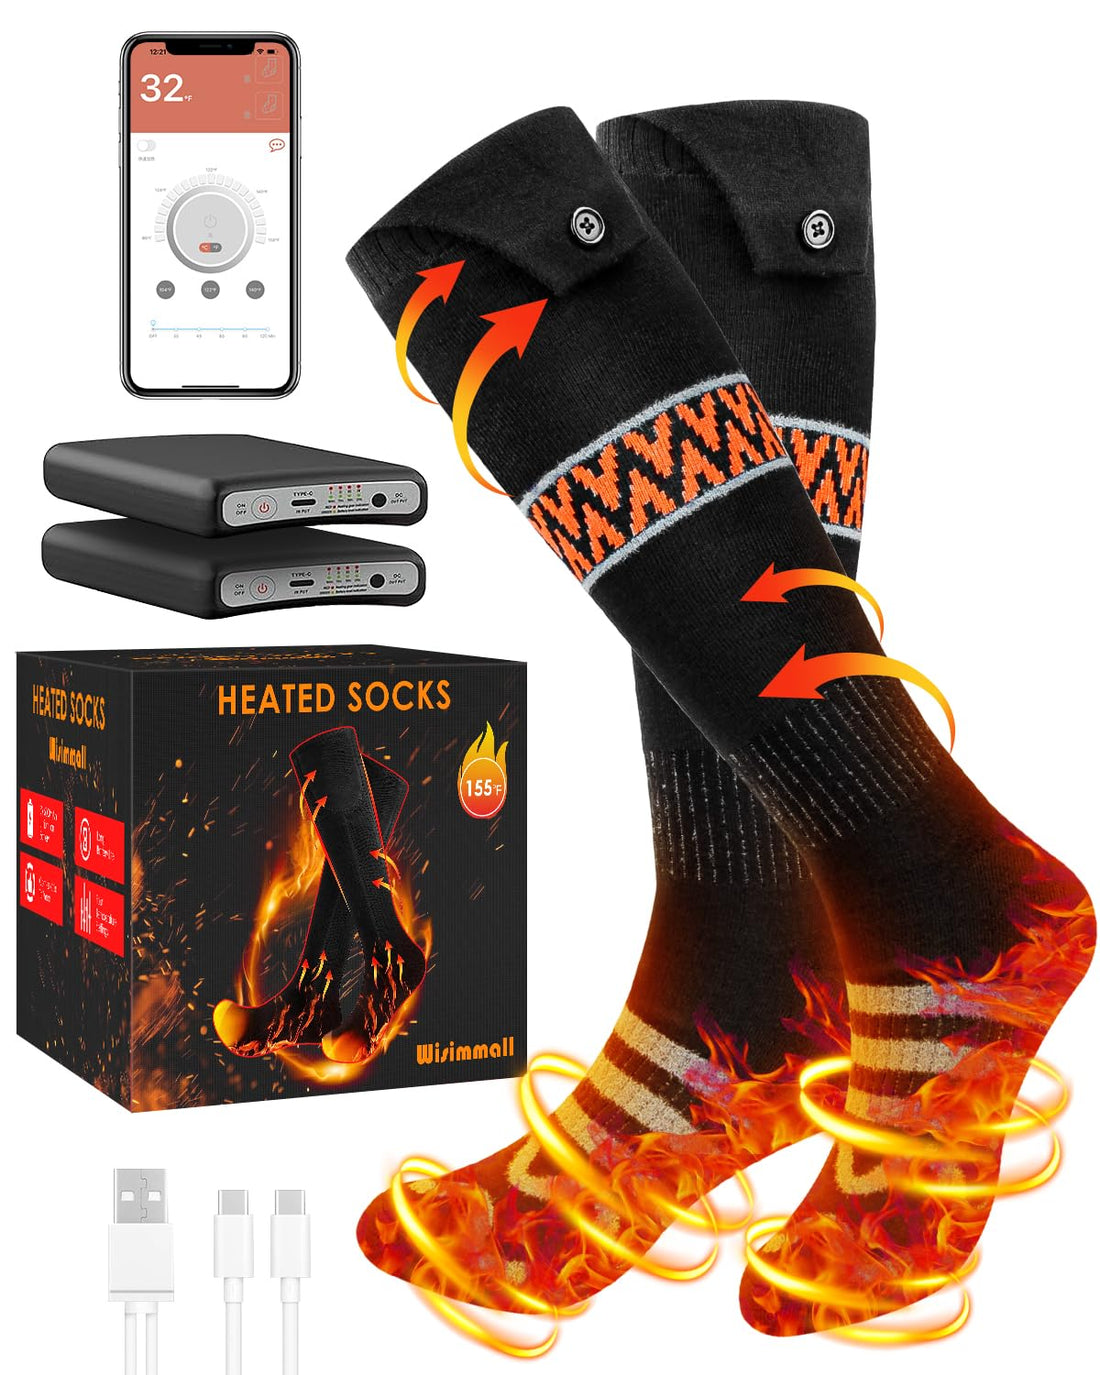 Rechargeable Electric Heated Socks for Men Women, 5000mAh Battery Powered Warming Socks with 360° Heating, 4 Heat Settings, Battery Operated Washable Battery Socks for Hunting Hiking Ski Camping